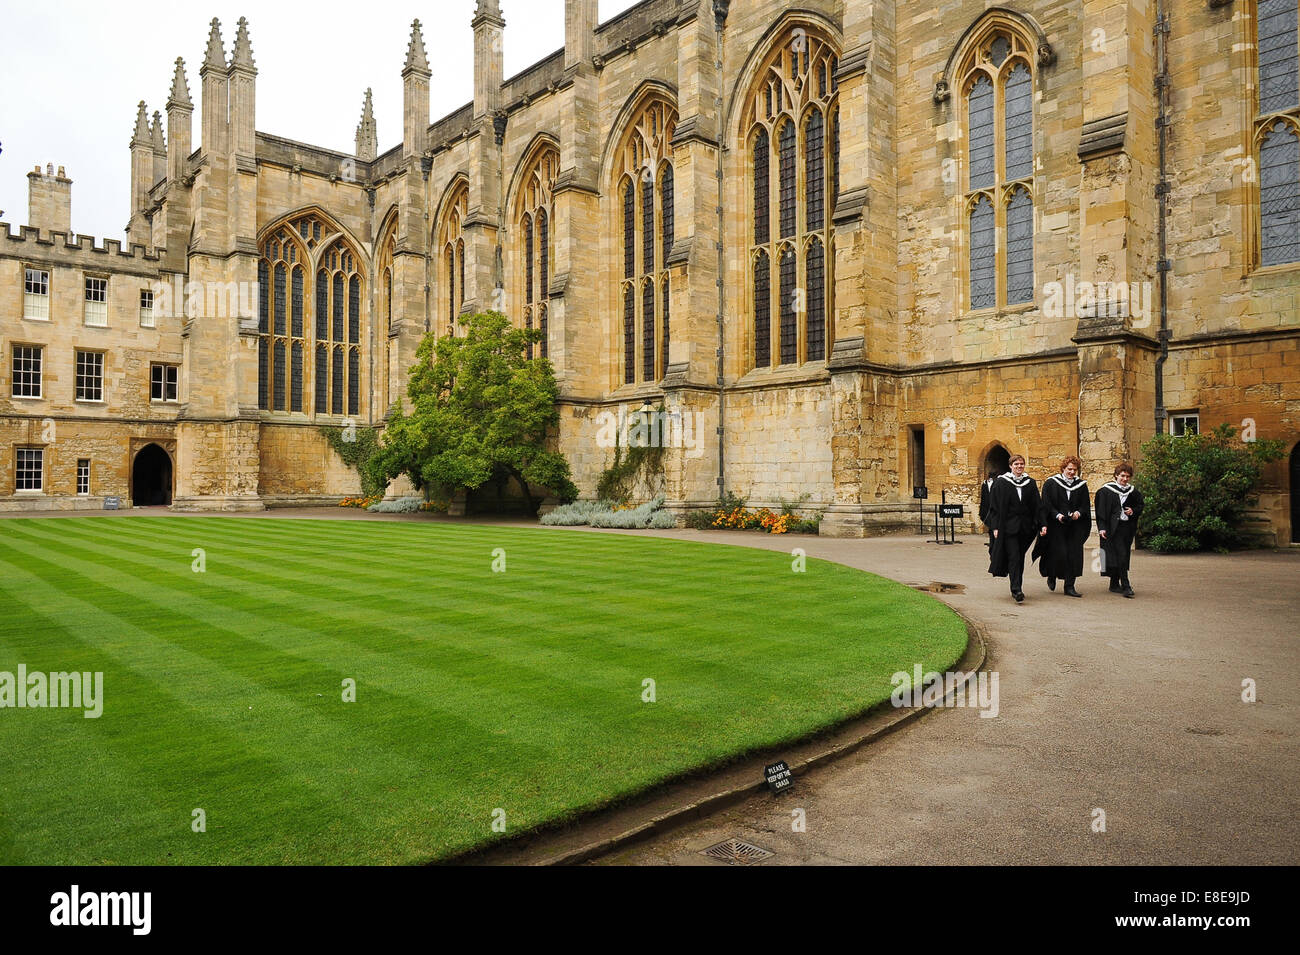 3 graduates wearing sub fusc gowns walking in the quad inside New College Oxford, part of the University of Oxford, UK Stock Photo